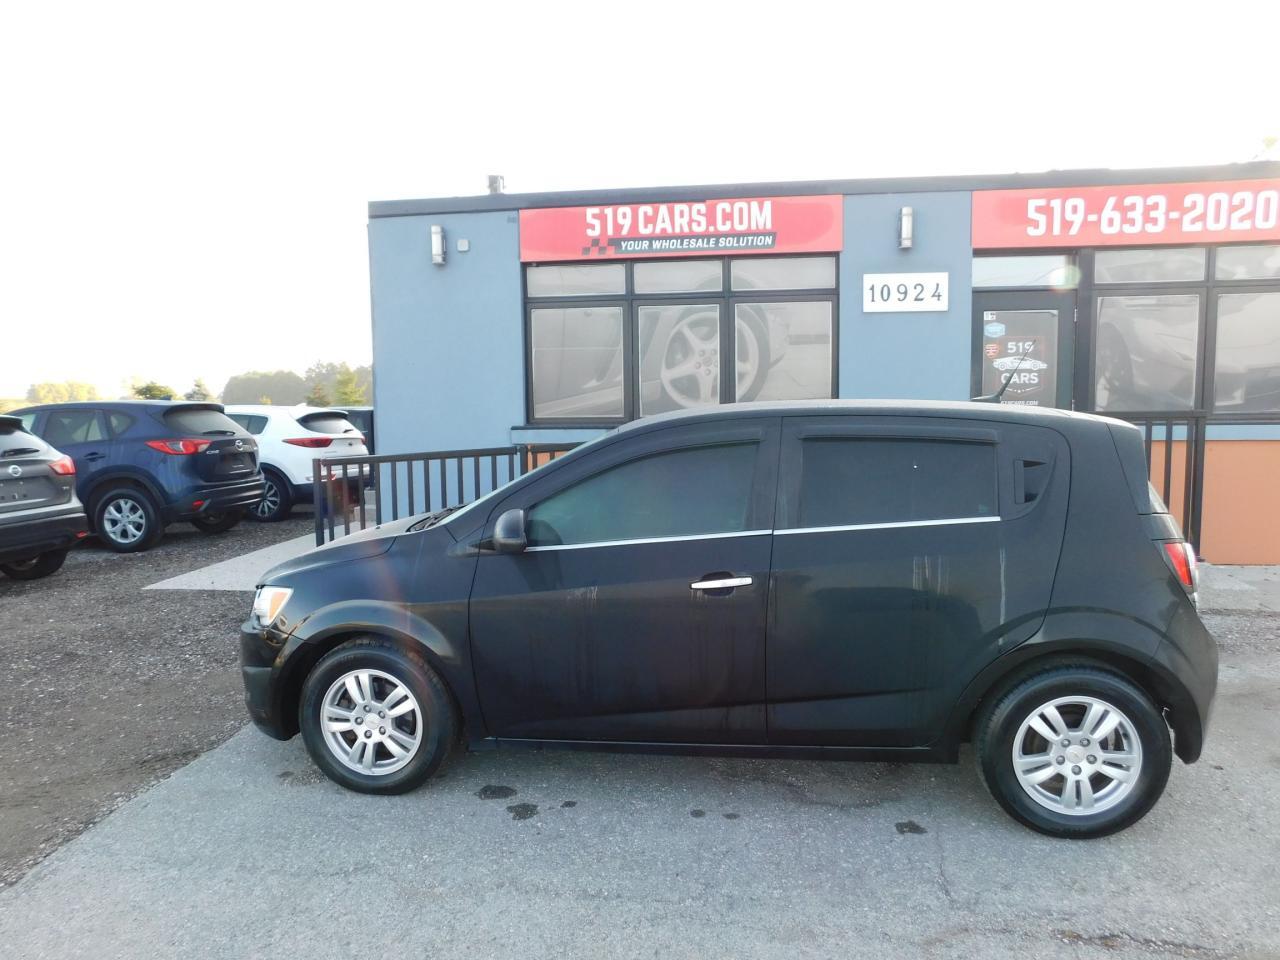 2012 Chevrolet Sonic Low Km | A/C | Cruise